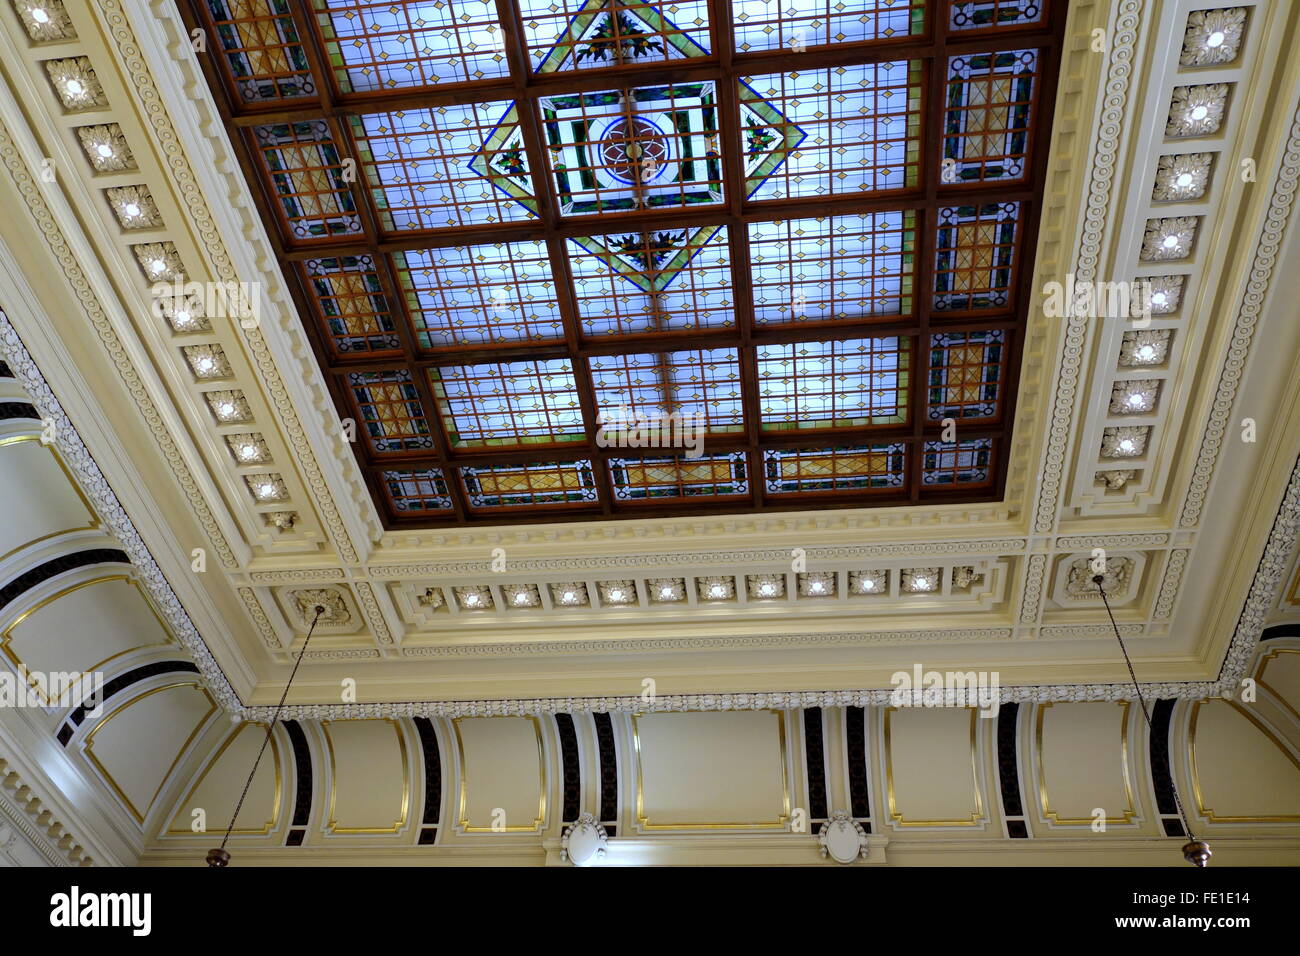 Architectural details of the waiting room ceiling at the Hoboken Train Terminal,  Hoboken, New Jersey, USA Stock Photo